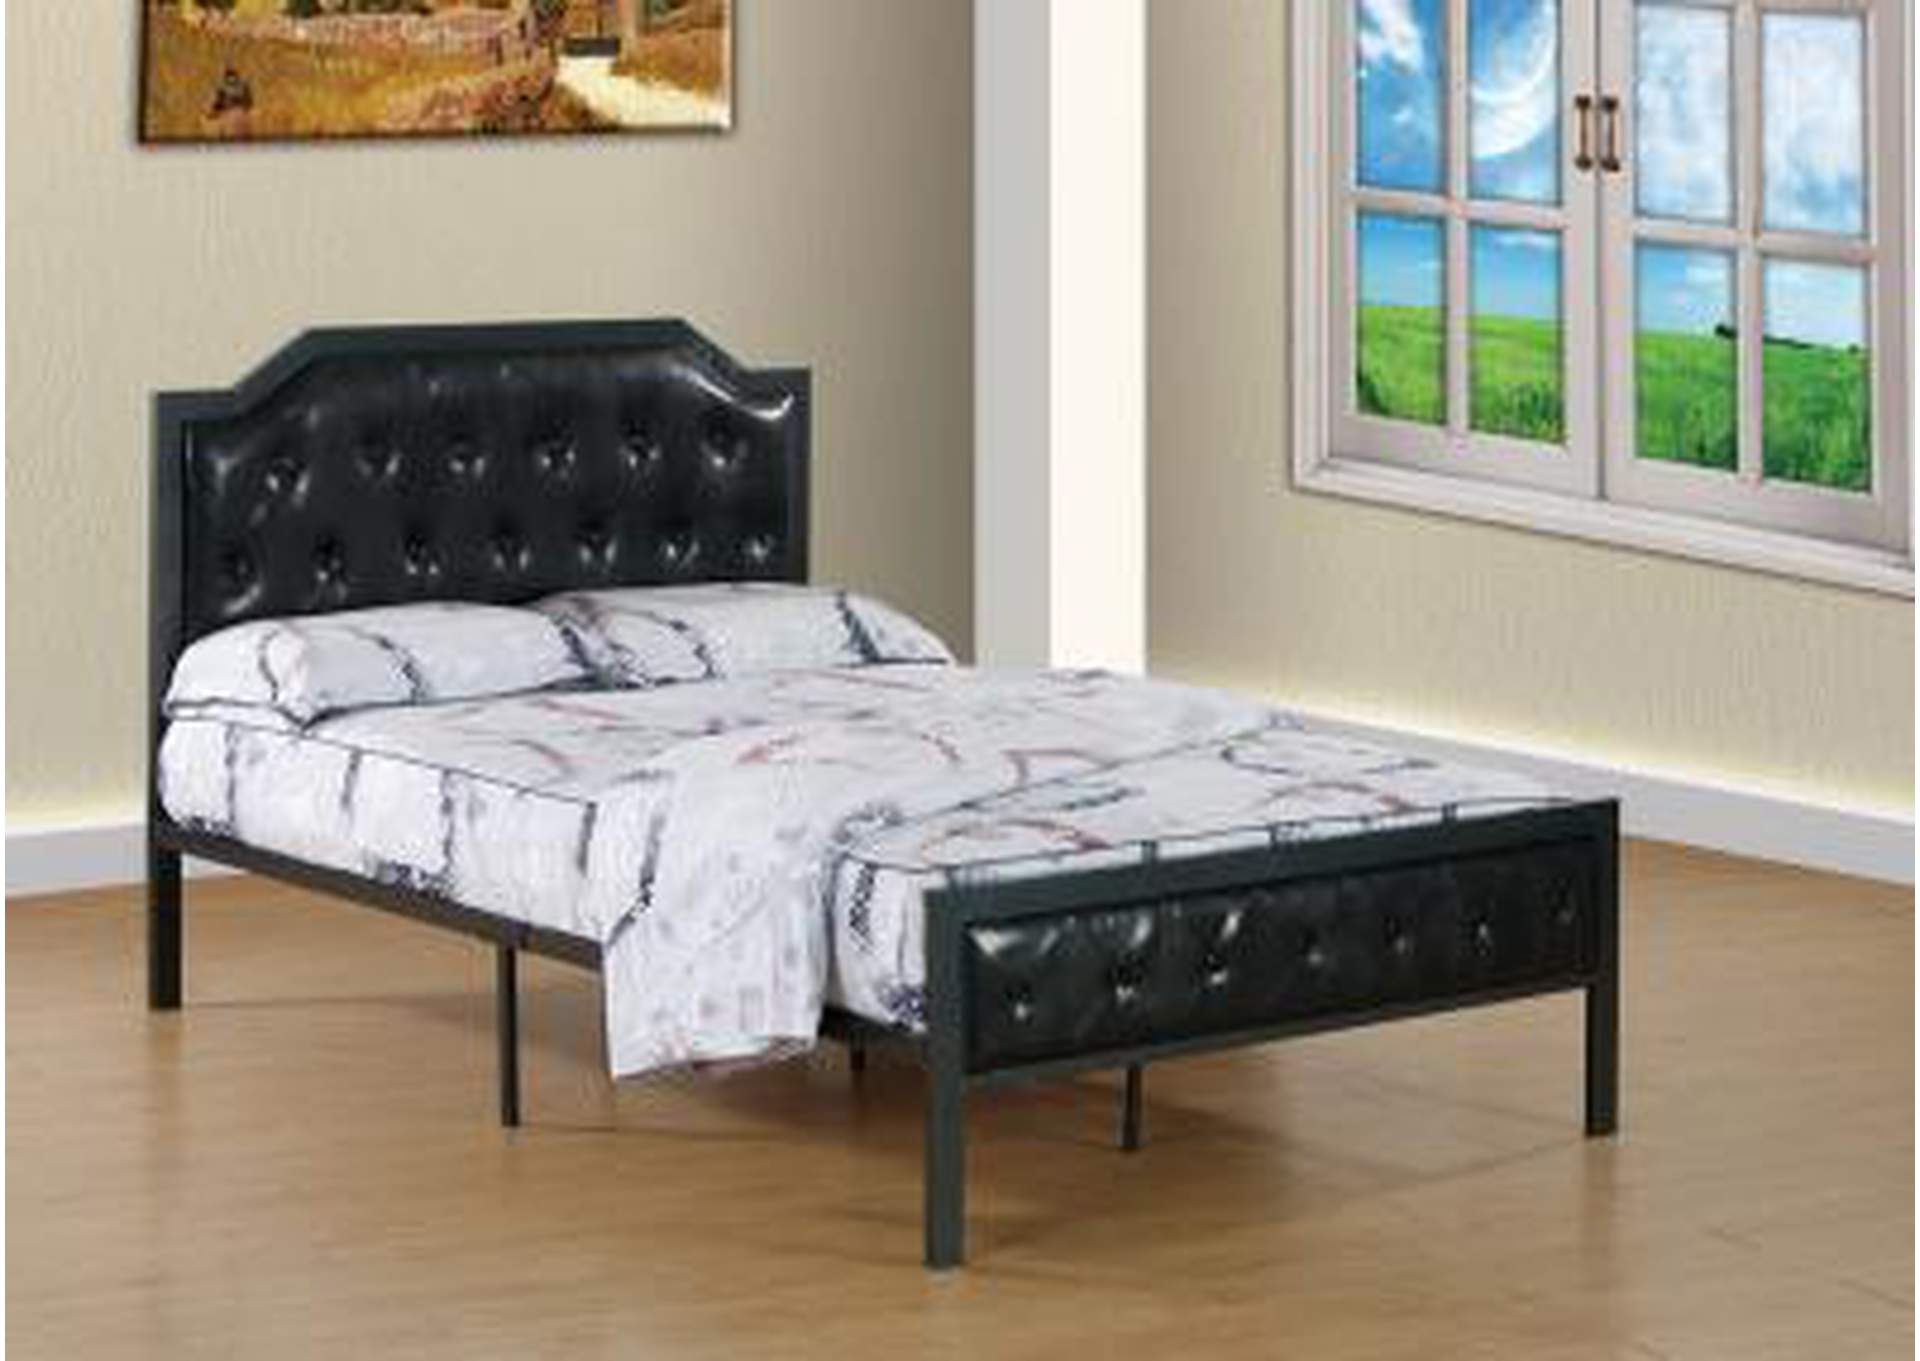 B907 Twin Bed,Nationwide